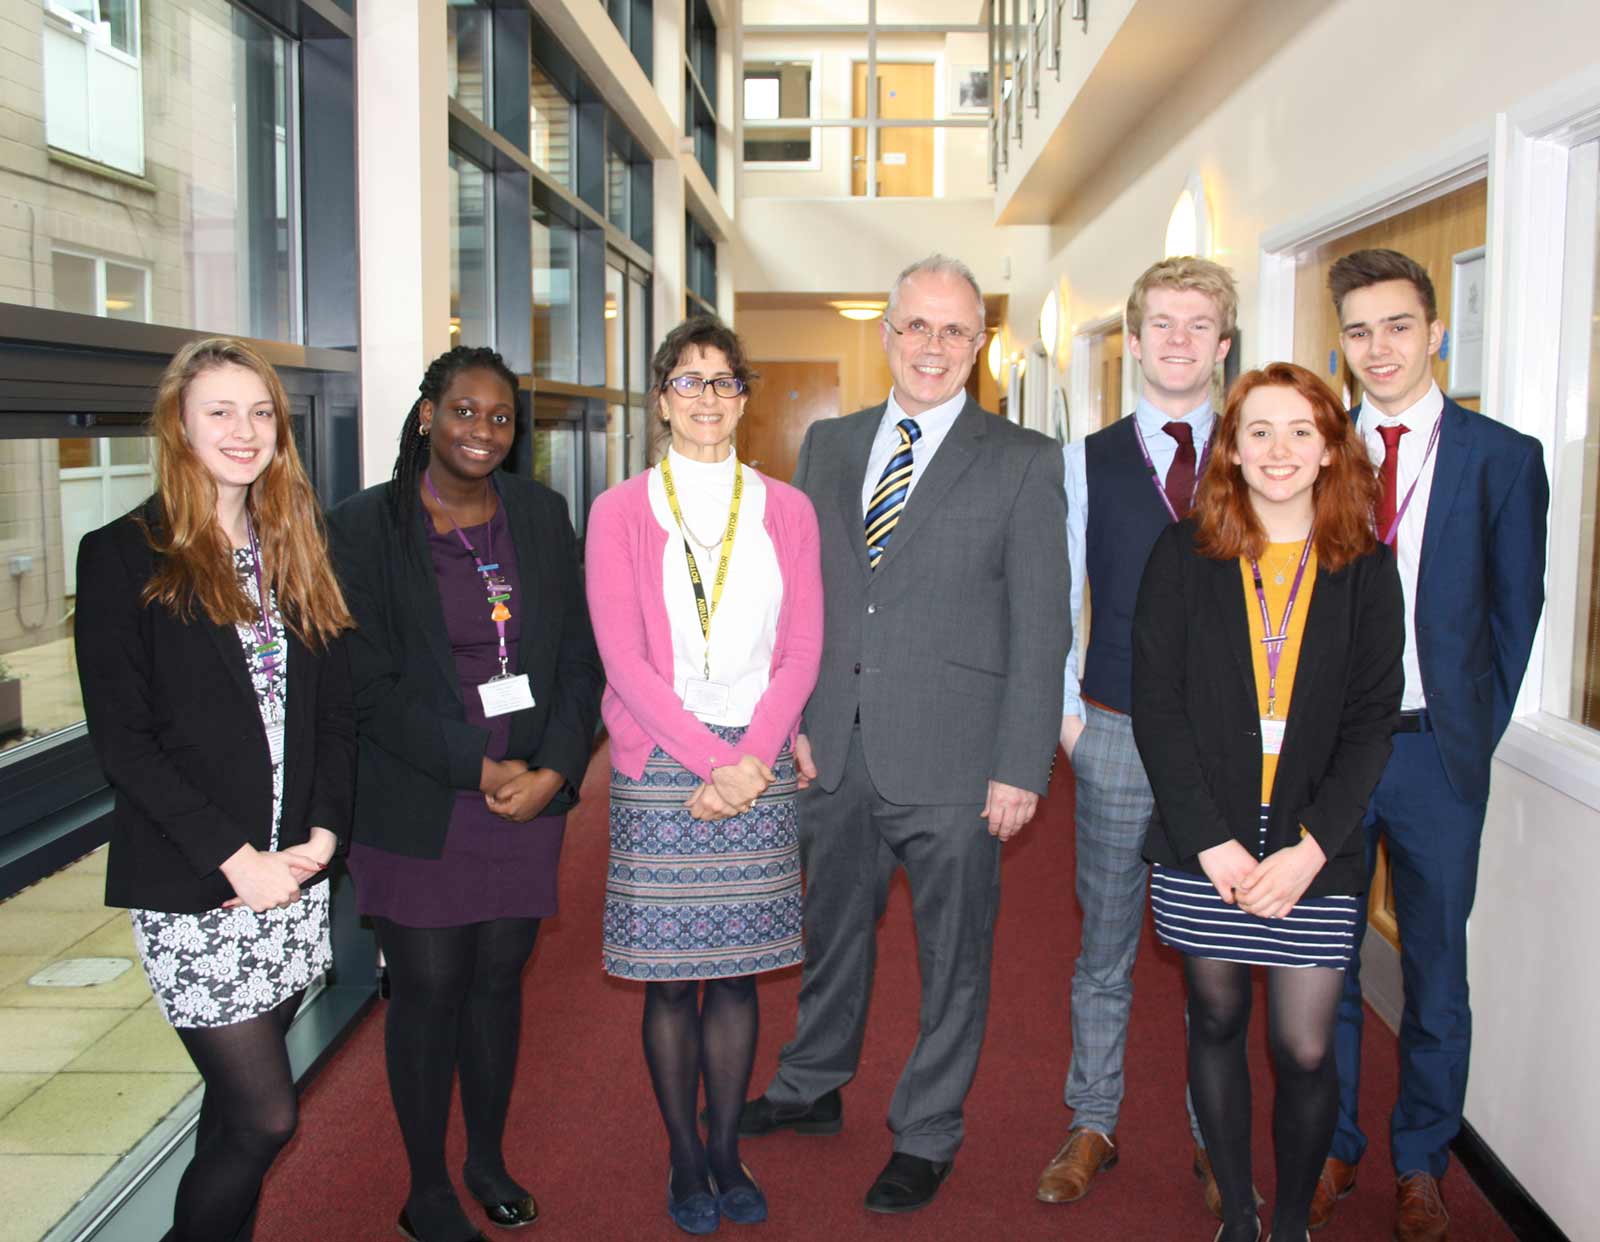 Year 12 students - Kate Watson and Mam Jallow, Former Head Girl - Michelle Mohajer, Former Head Boy – Alistair Gibb, students – George Kendall, Ellen Young and Owen Jones